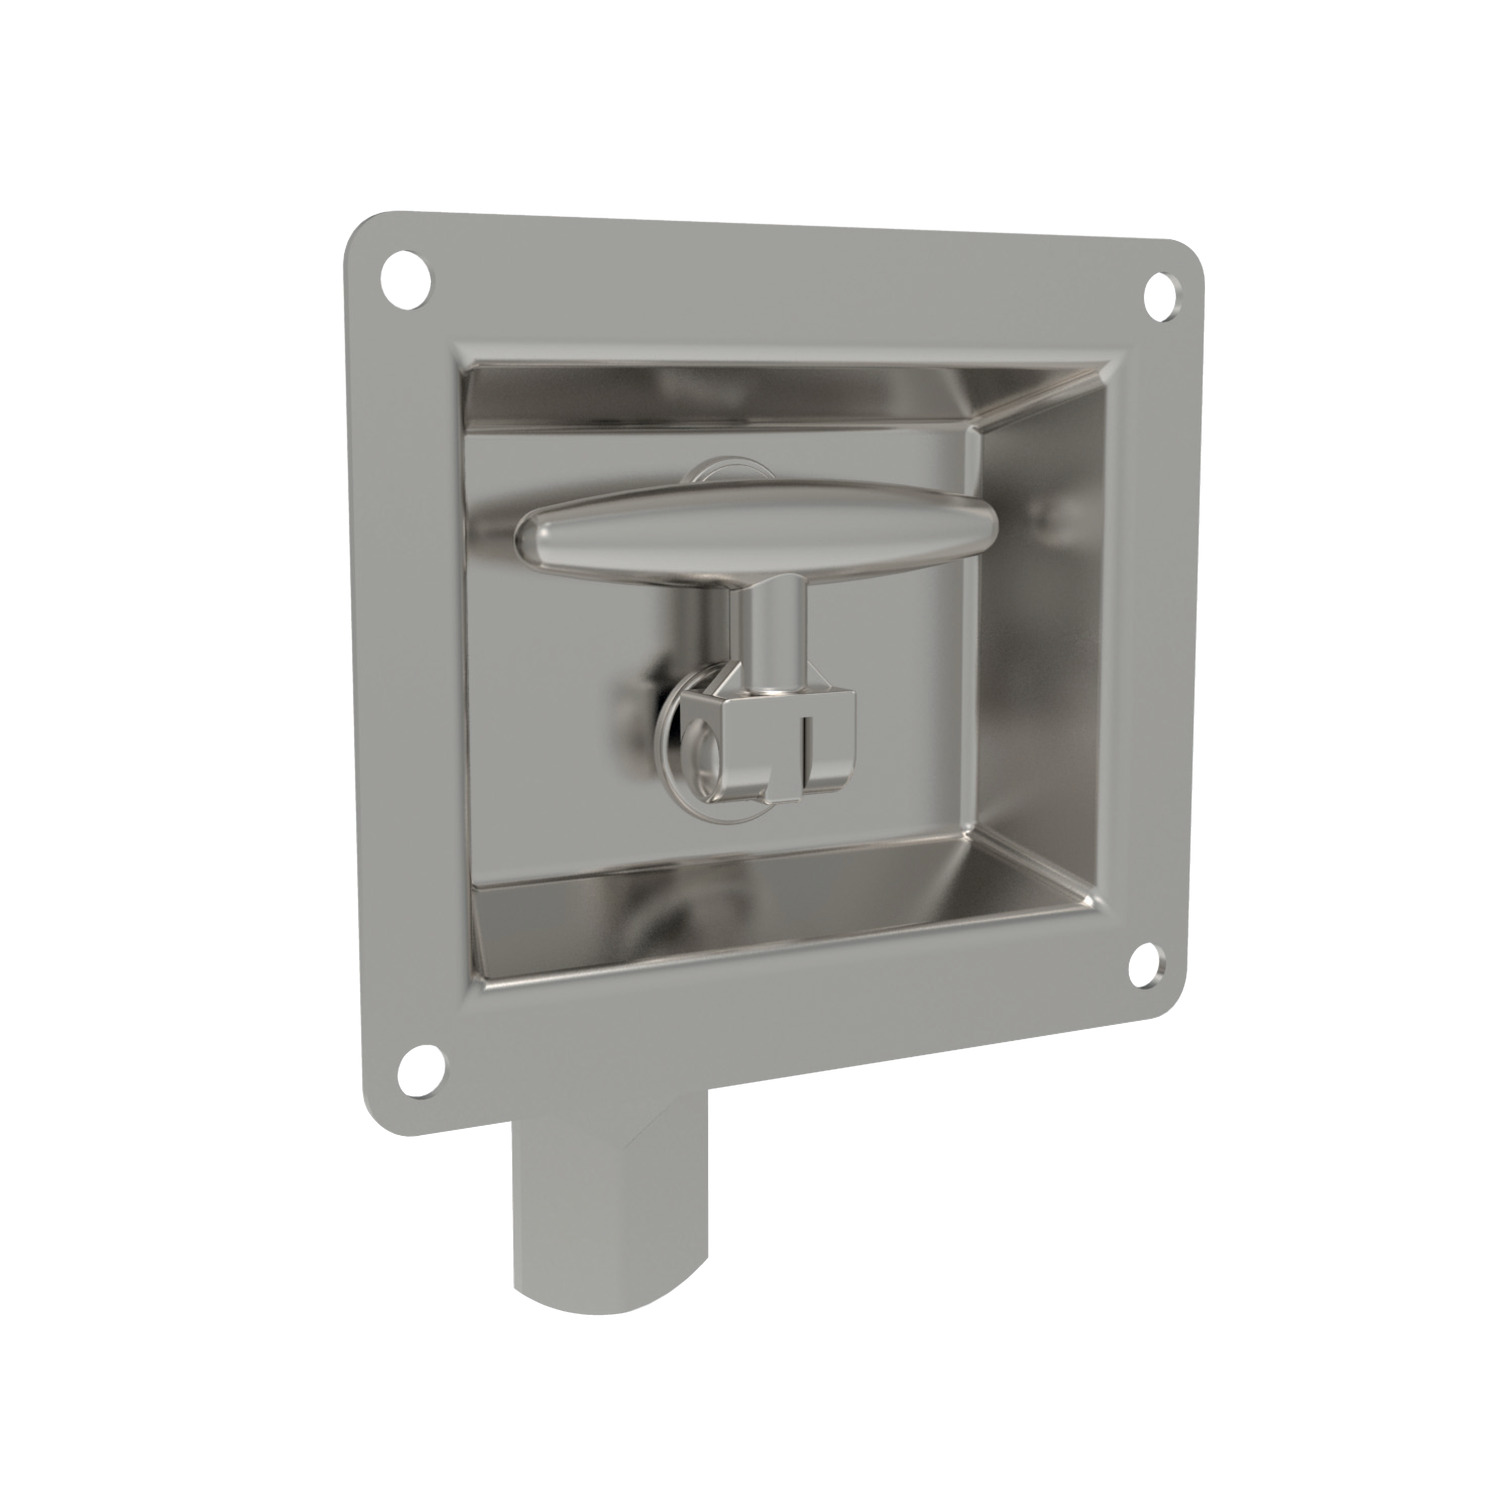 Product B4590, Cam Latches - Flush T-Handle no lock option - adjustable grip - stainless steel / 